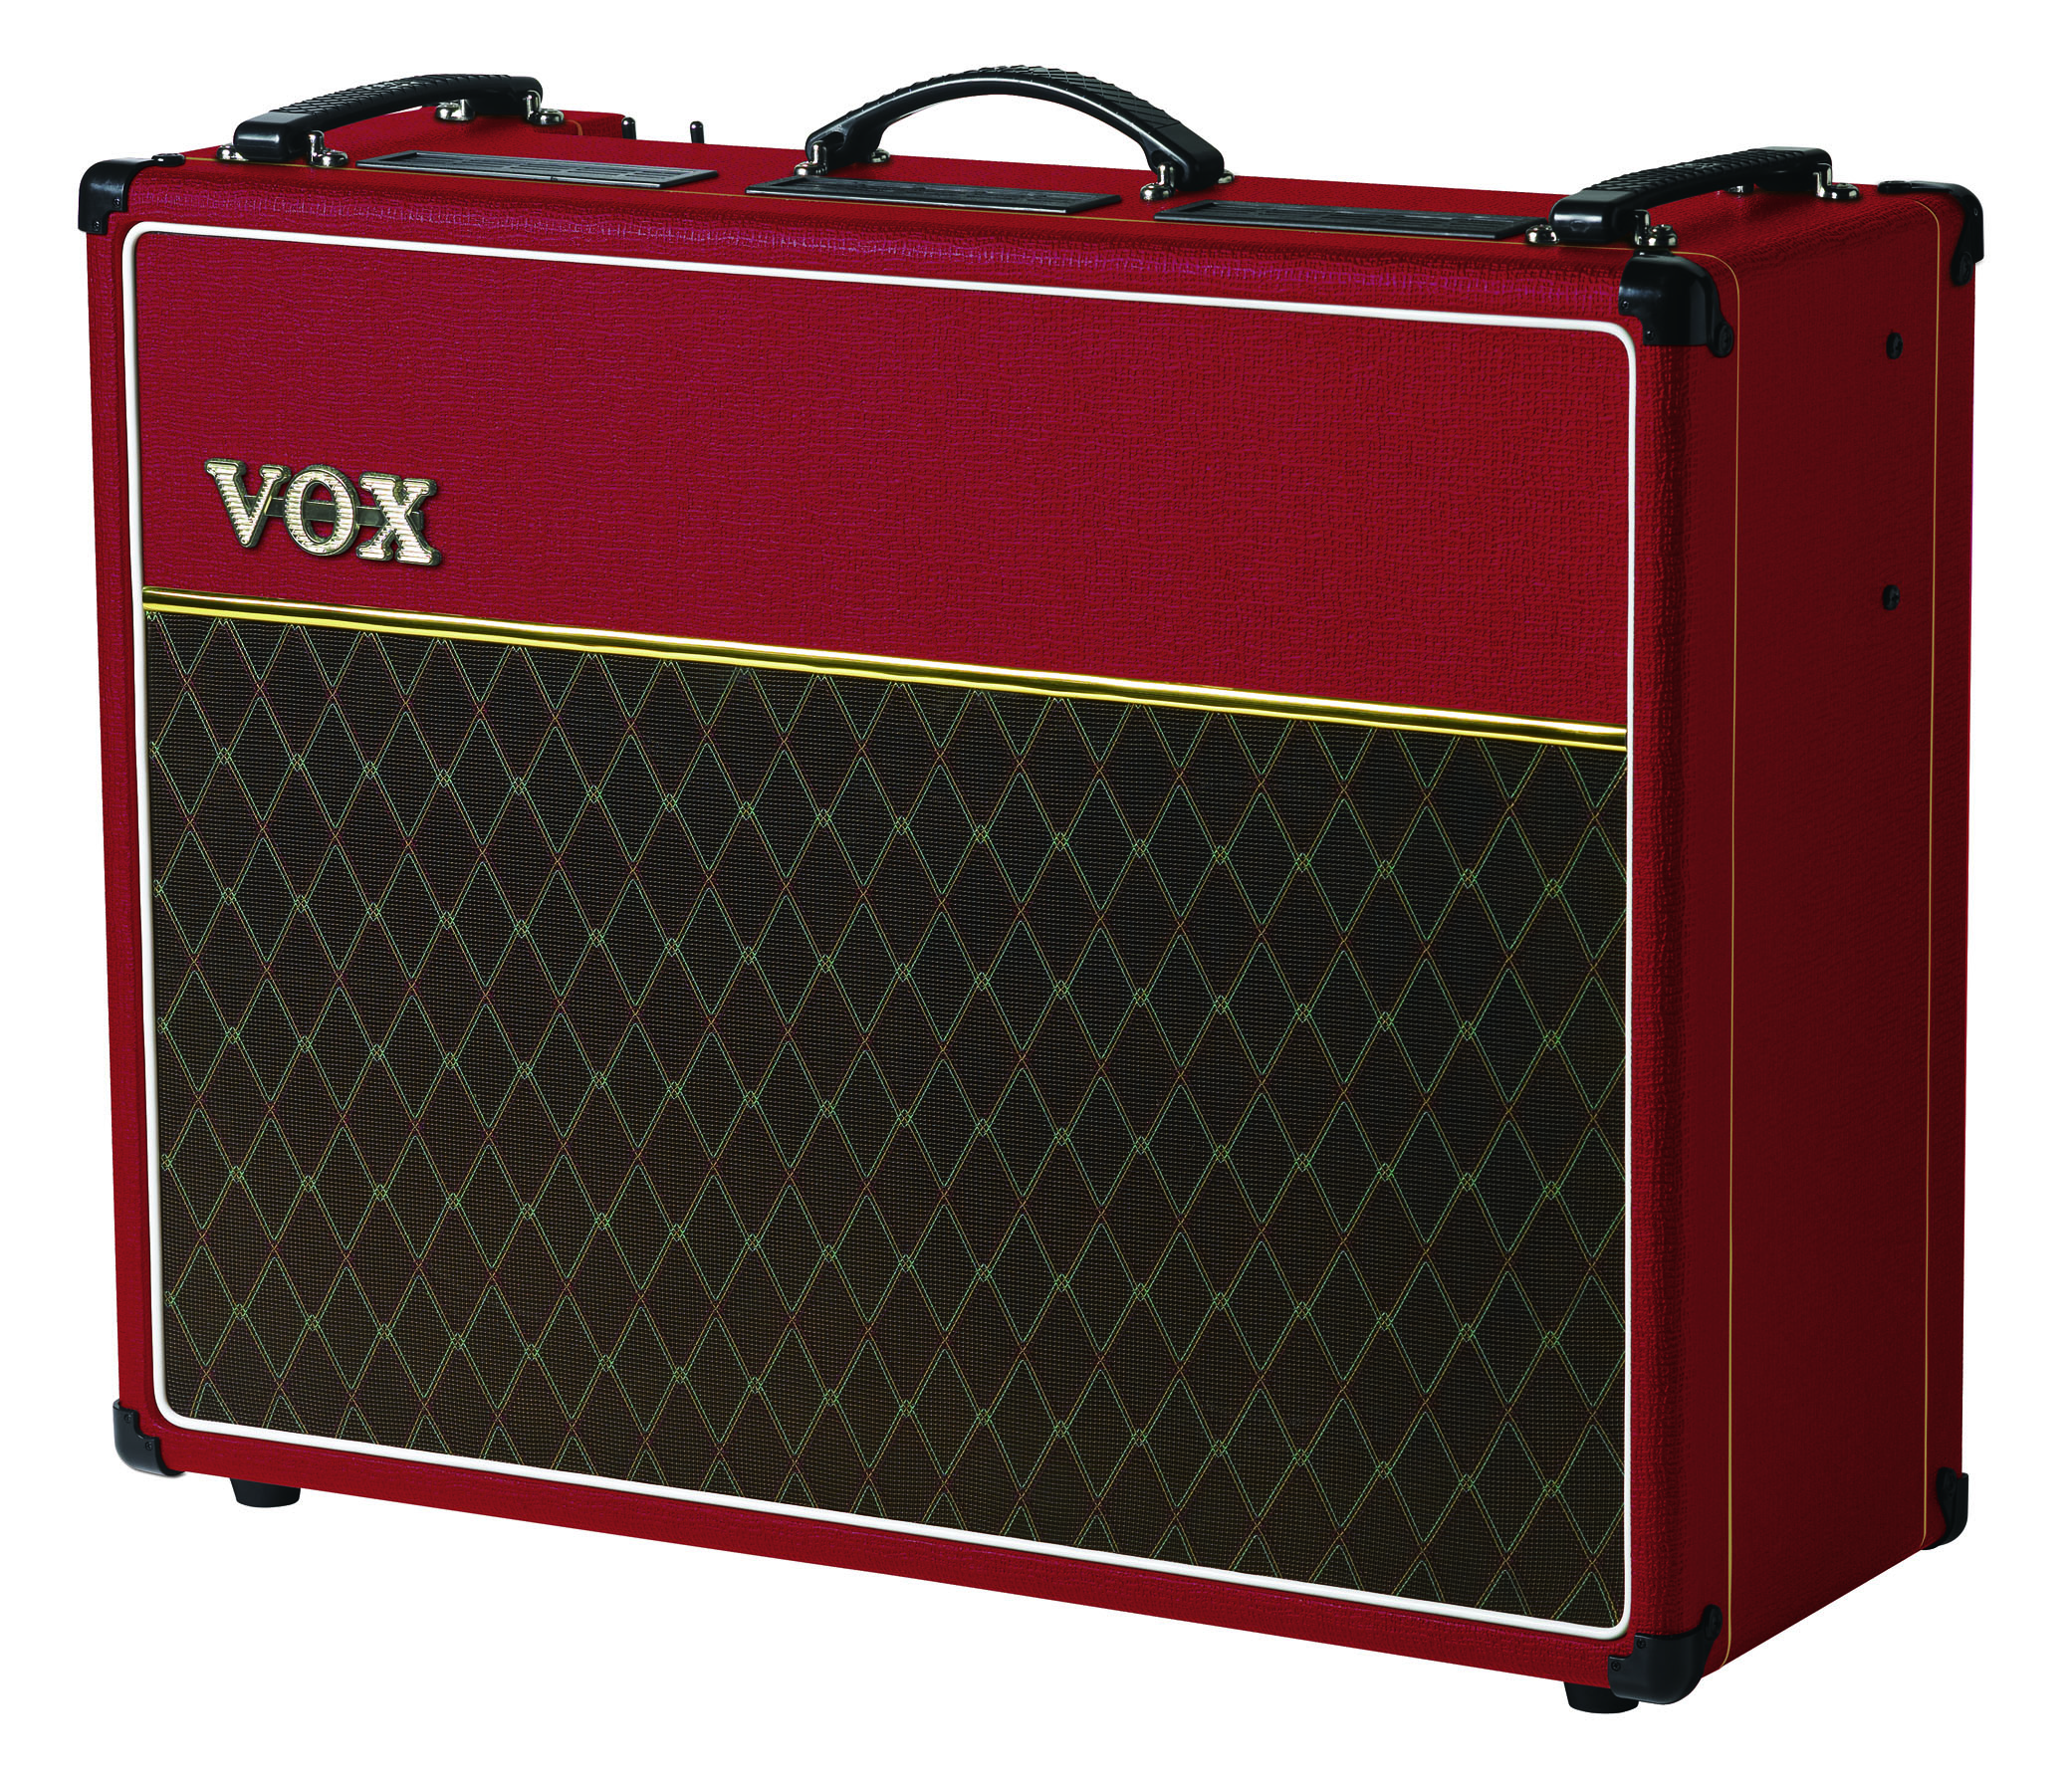 vox-ac30c2-rd-limited-edition-red.jpg